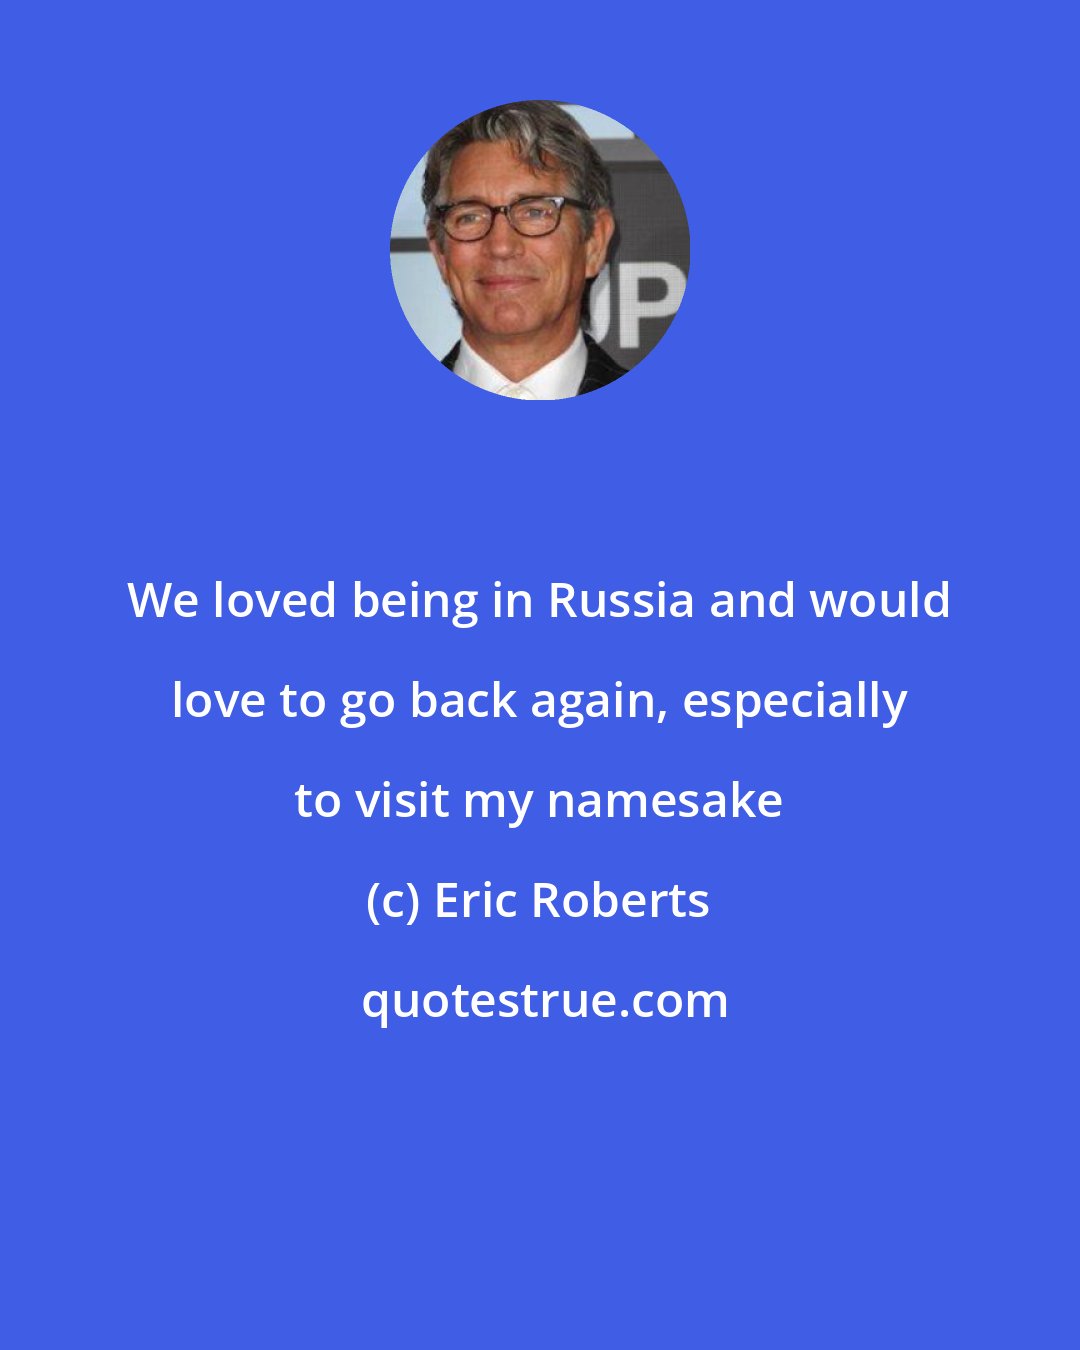 Eric Roberts: We loved being in Russia and would love to go back again, especially to visit my namesake